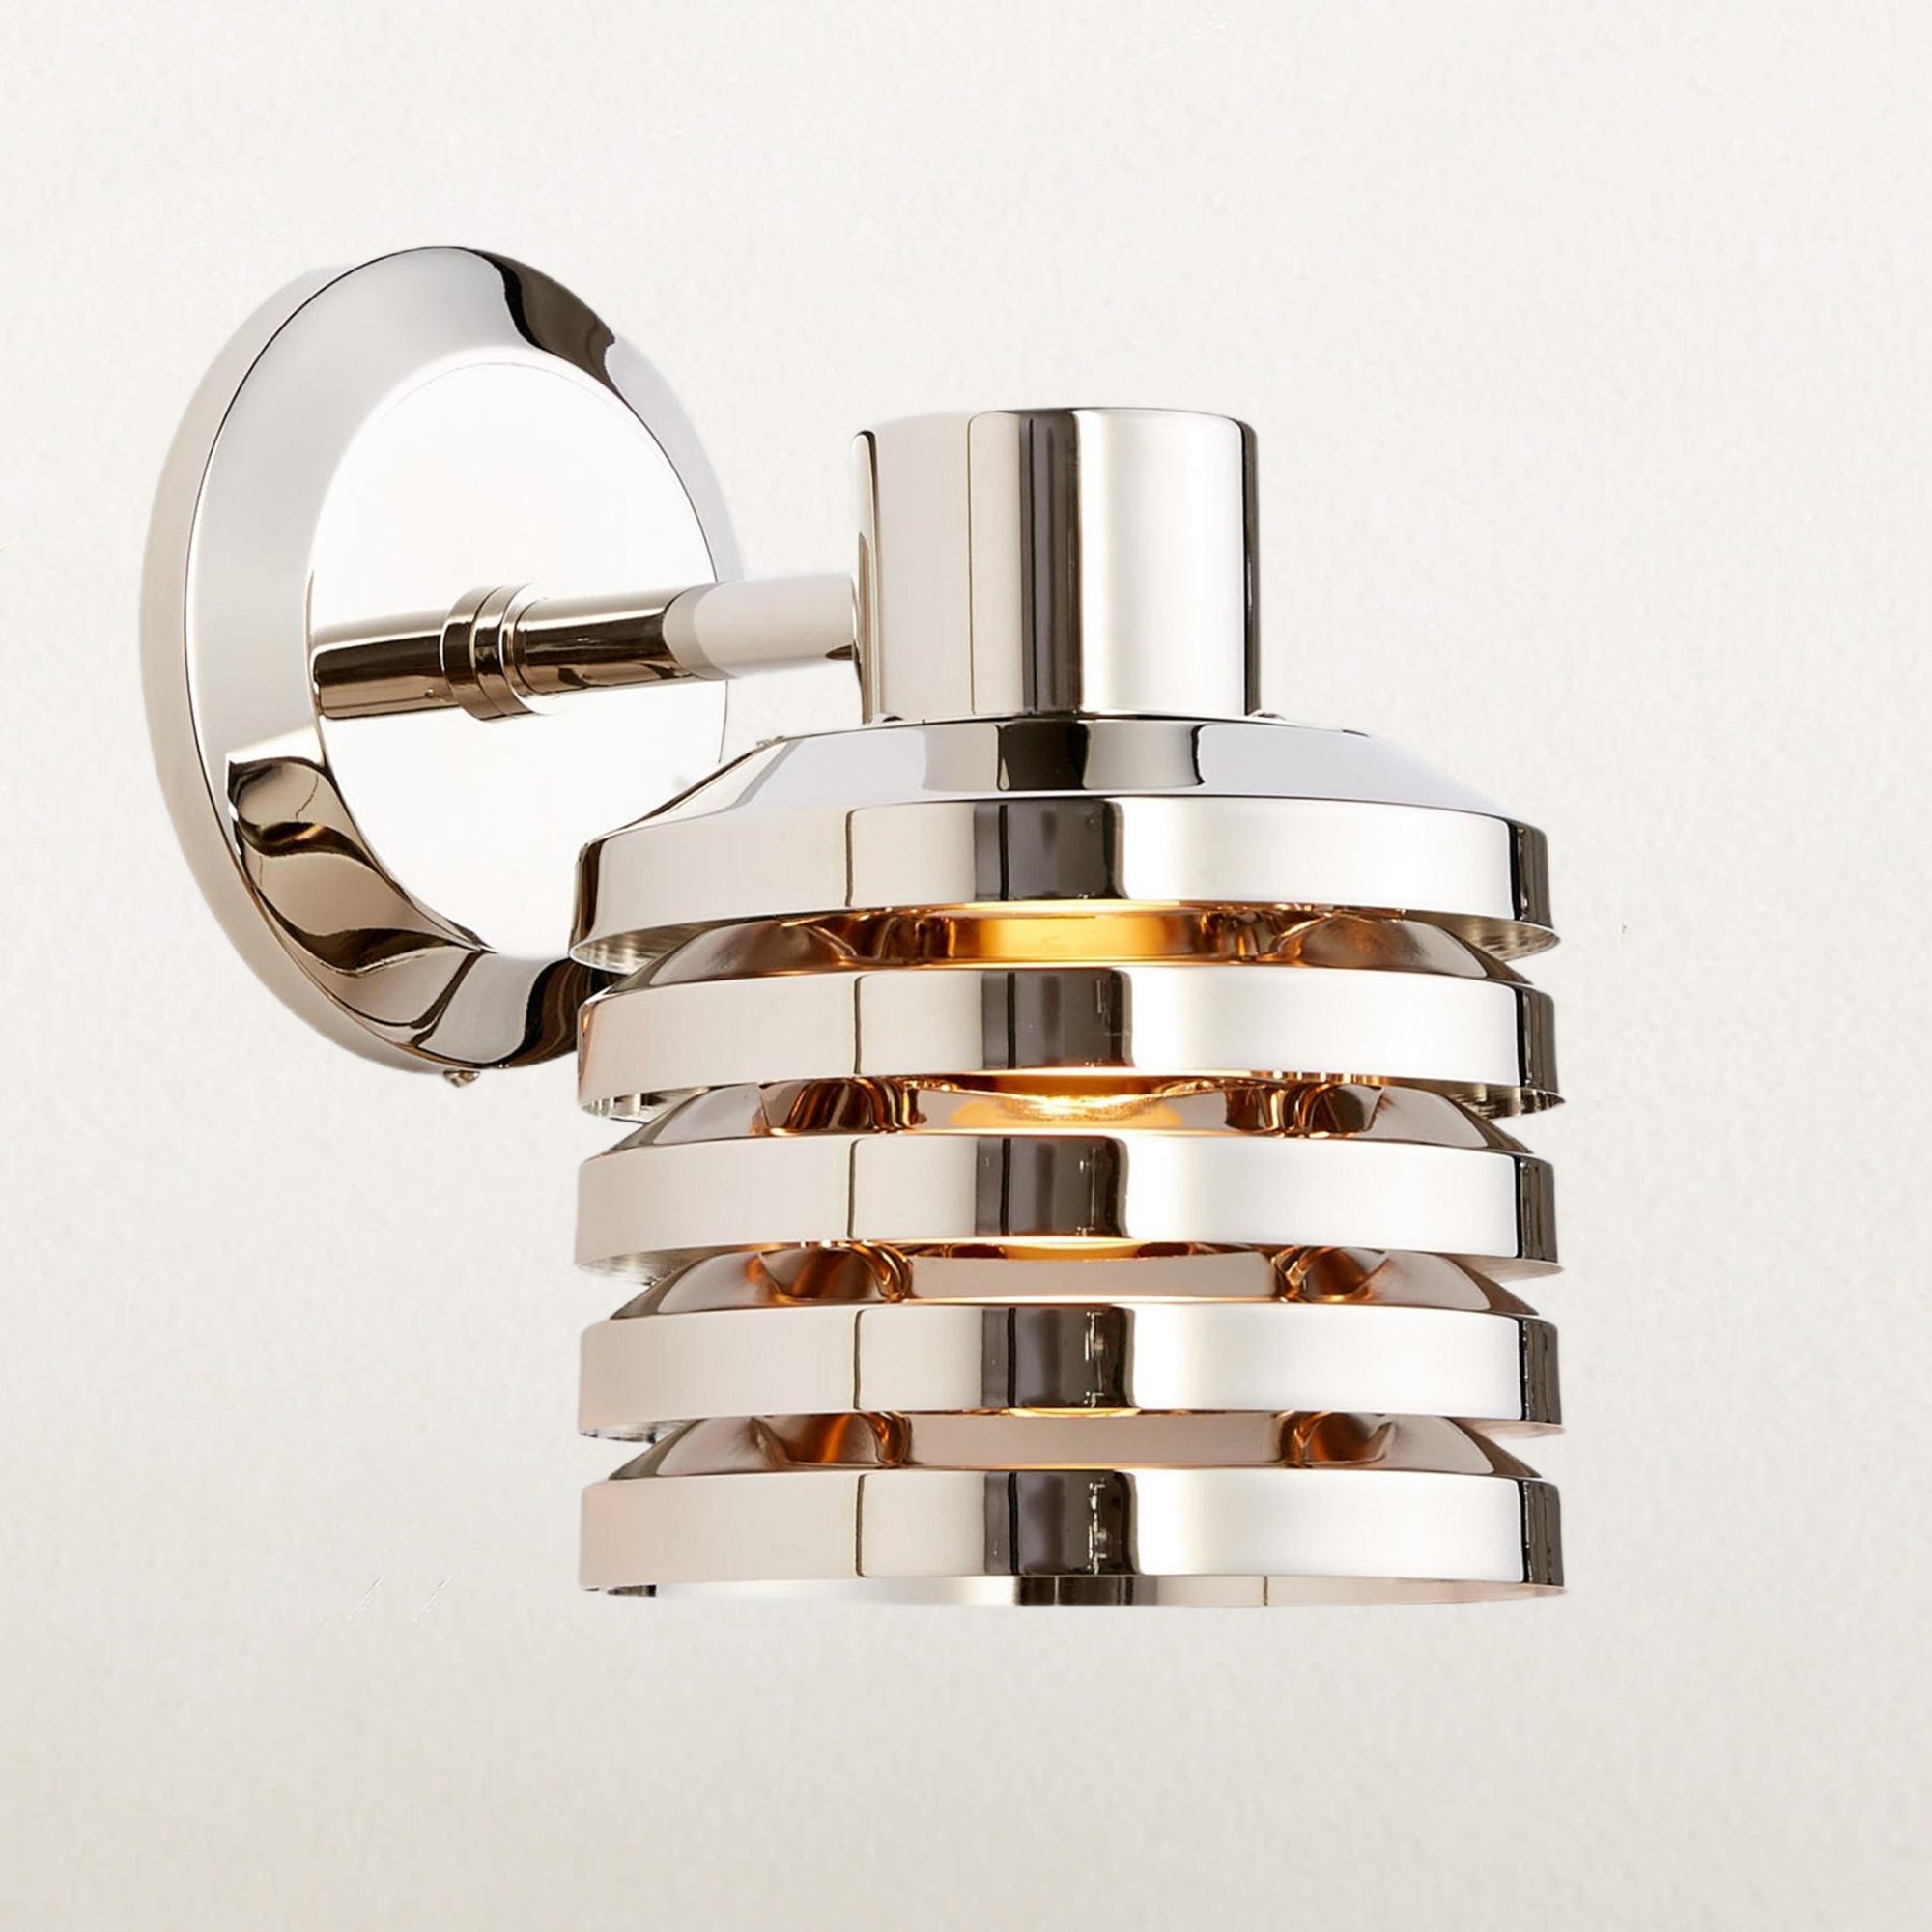 Illuminate Brass Louver Sconce - Adjustable Dimmable Wall Light Fixture